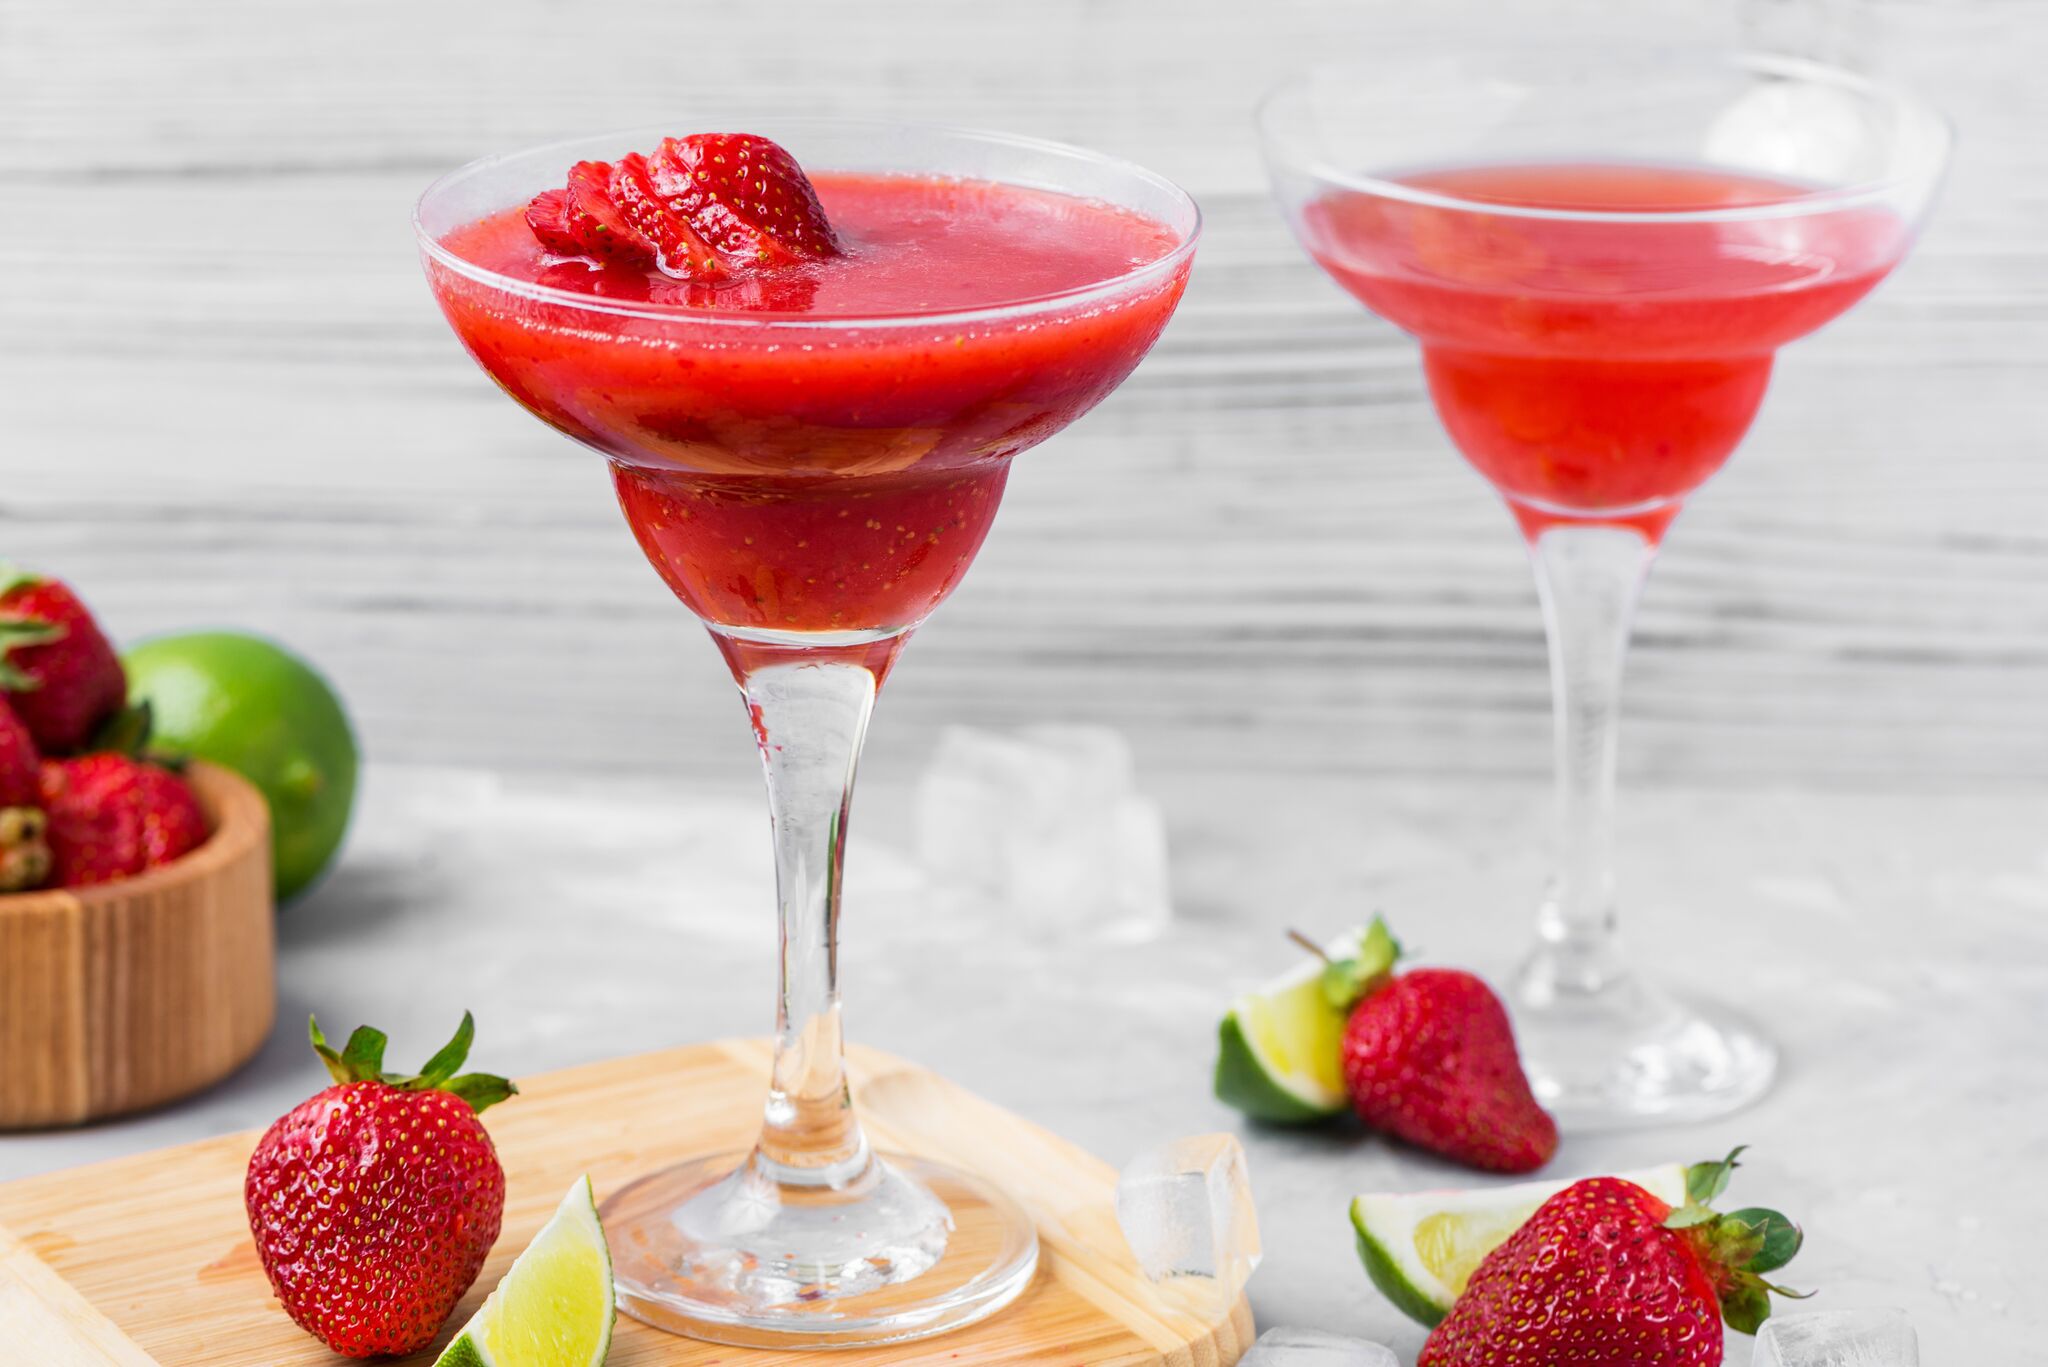 Wondering What's New In Cocktails: The Daiquiri